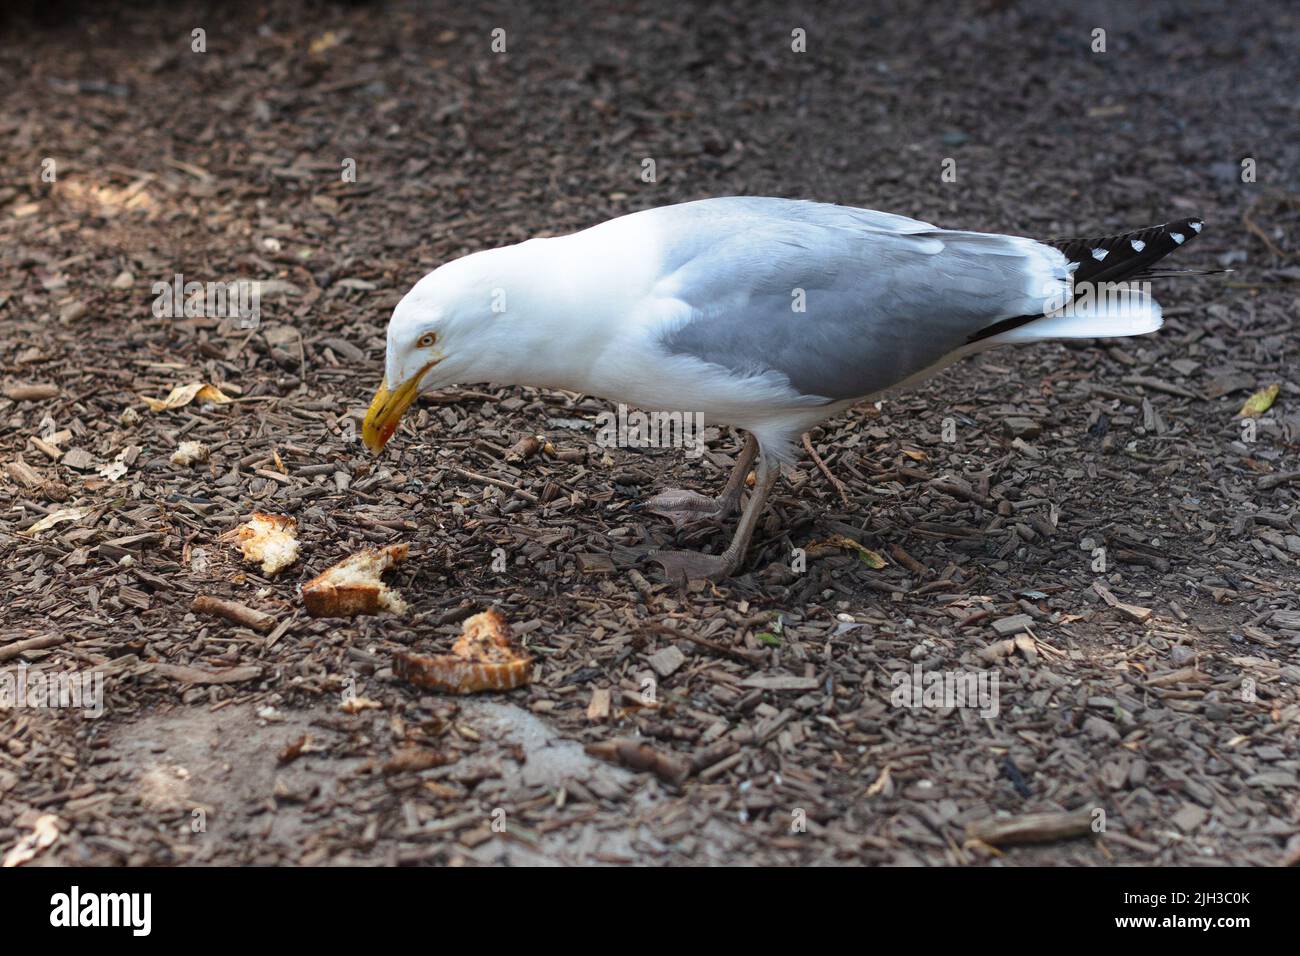 A hungry seagull scavenging for food swooped down and stole a piece of toast from a person in a cafe. Single gull isolated on wood chip background Stock Photo